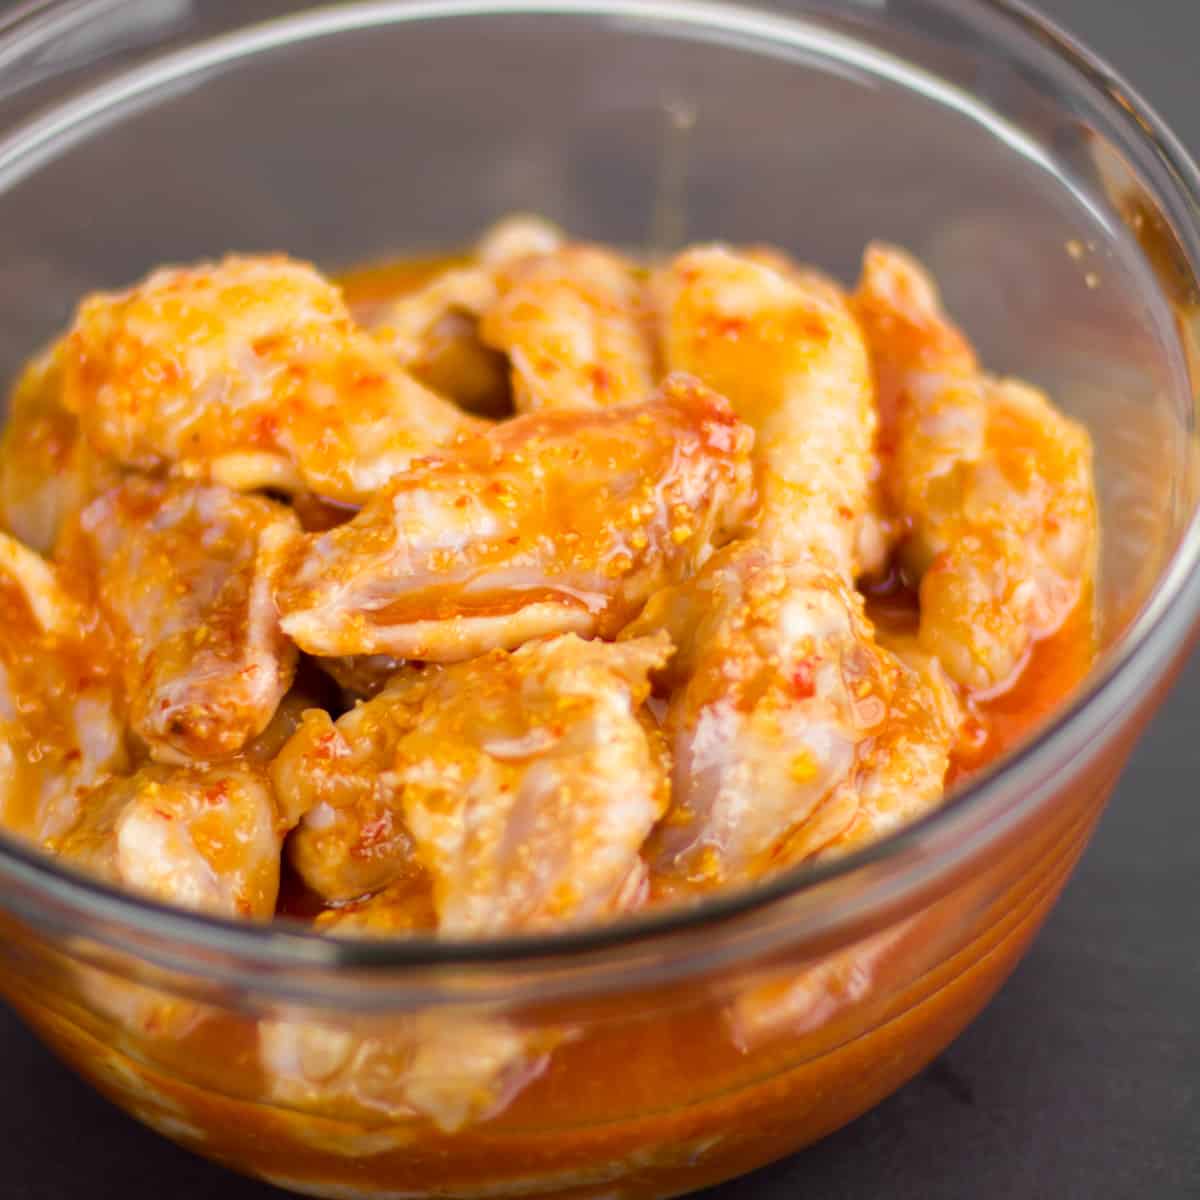 Chicken wings marinating in a glass mixing bowl.